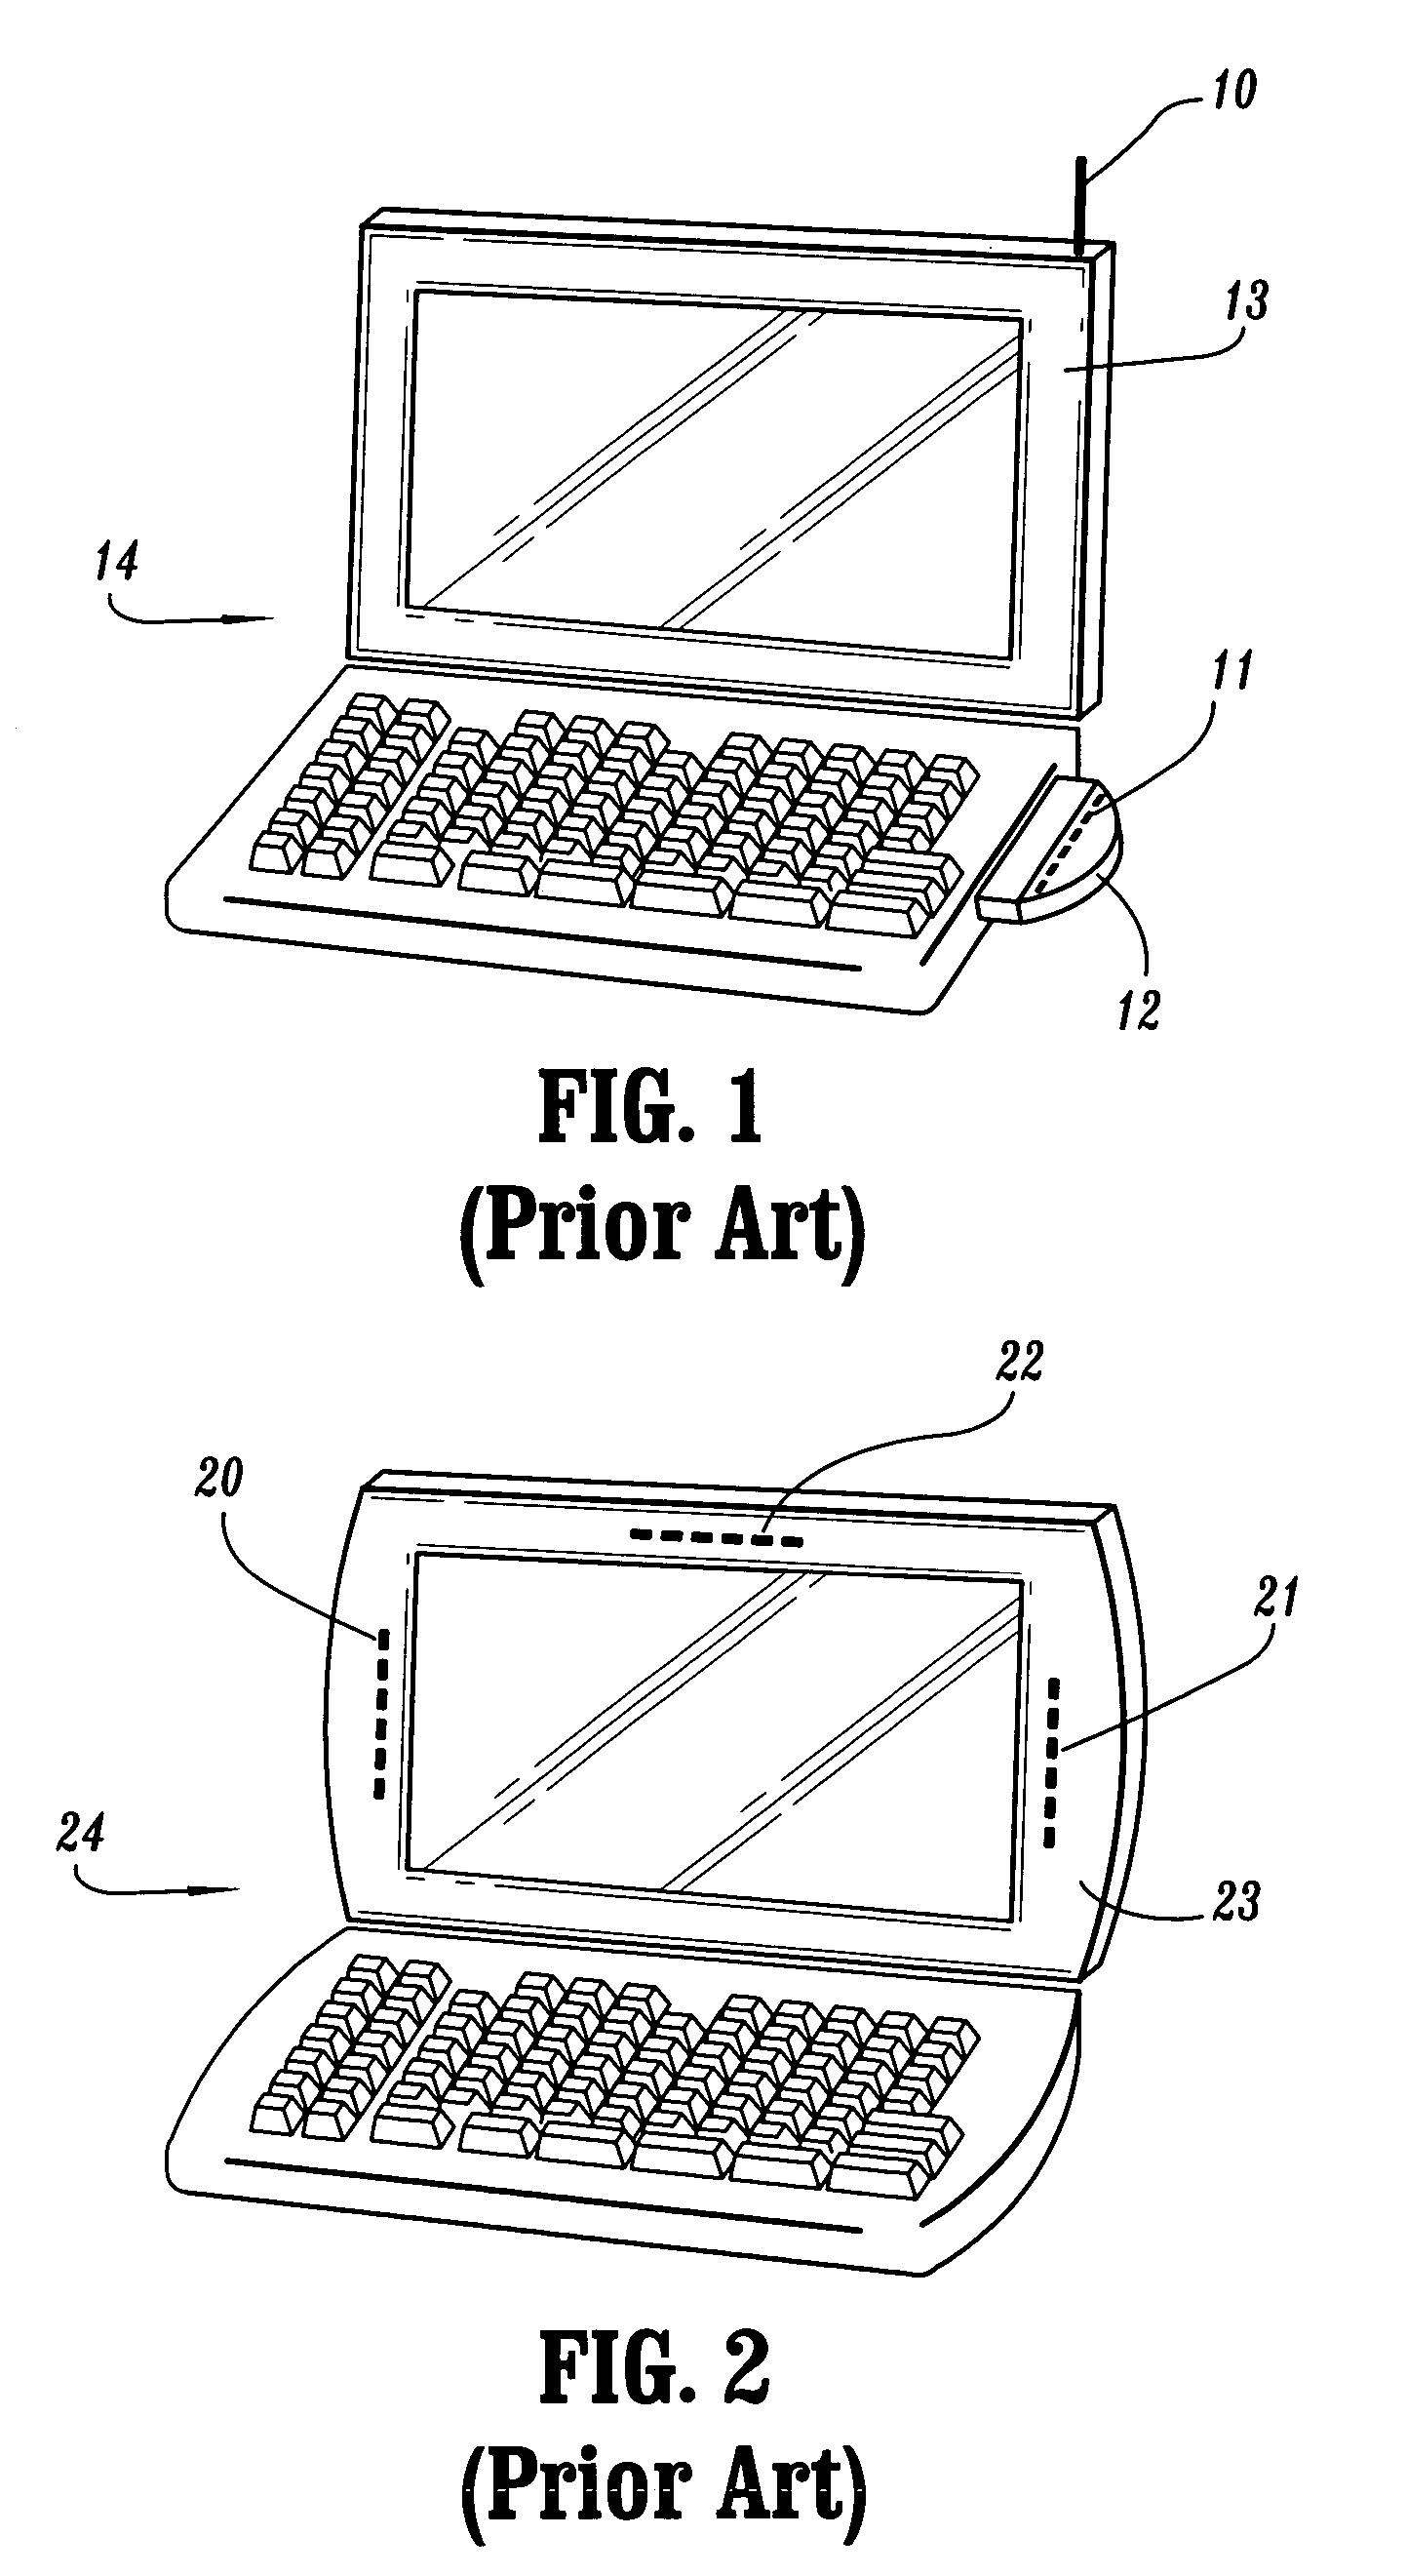 Antennas encapsulated within plastic display covers of computing devices